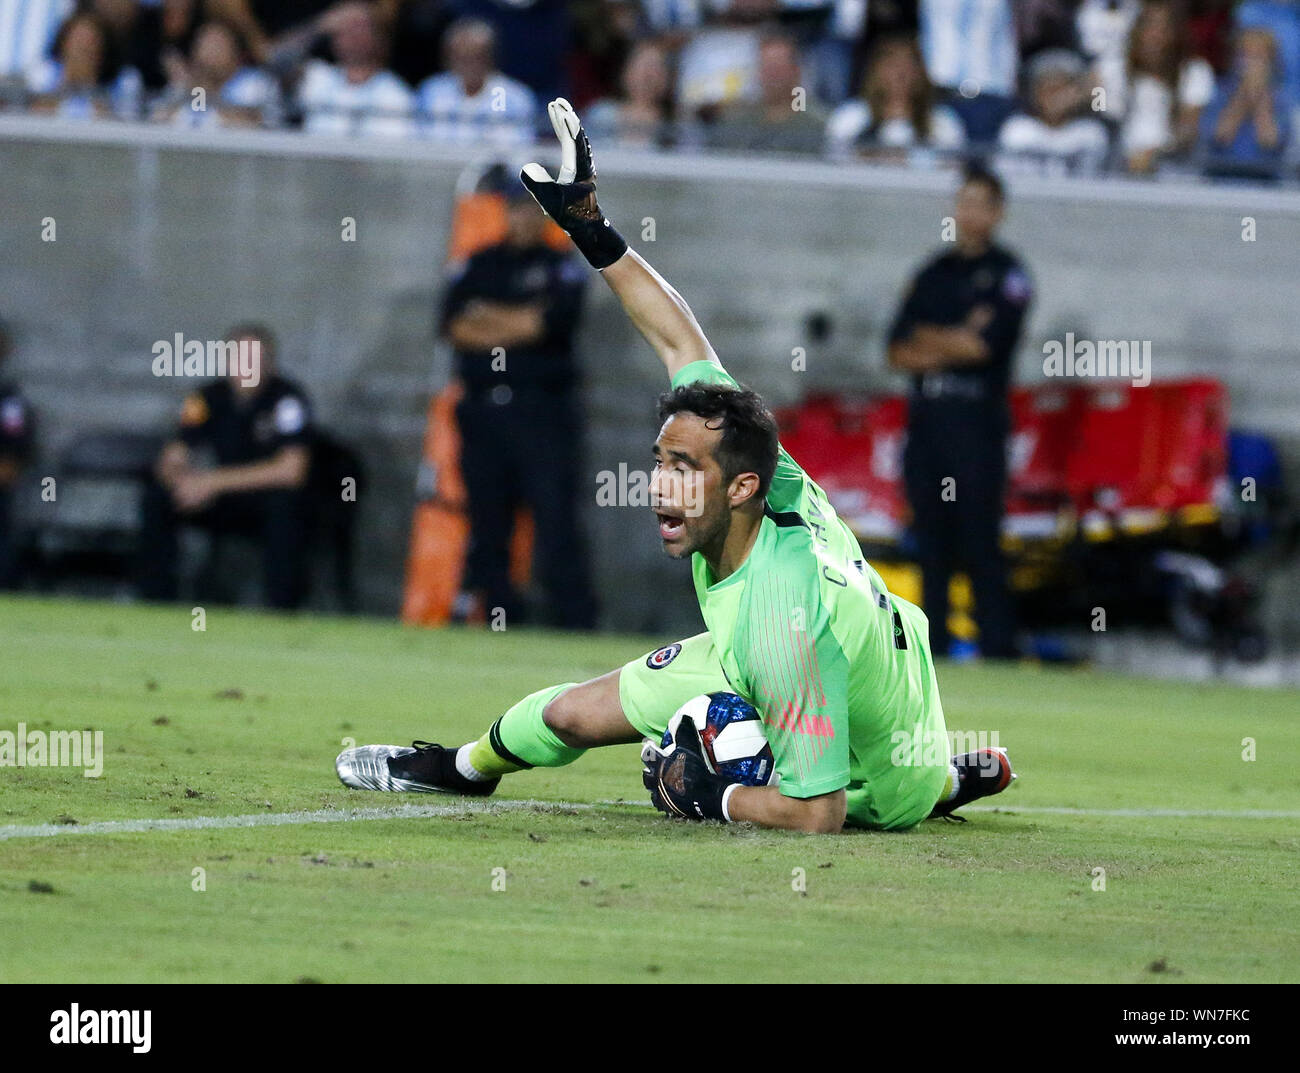 Los Angeles, California, USA. 5th Sep, 2019. Chile goalkeeper Claudio Bravo (1) makes a save during an International Friendly Soccer match between Argentina and Chile at the Los Angeles Memorial Coliseum in Los Angeles on Thursday, September 5, 2019. Credit: Ringo Chiu/ZUMA Wire/Alamy Live News Stock Photo